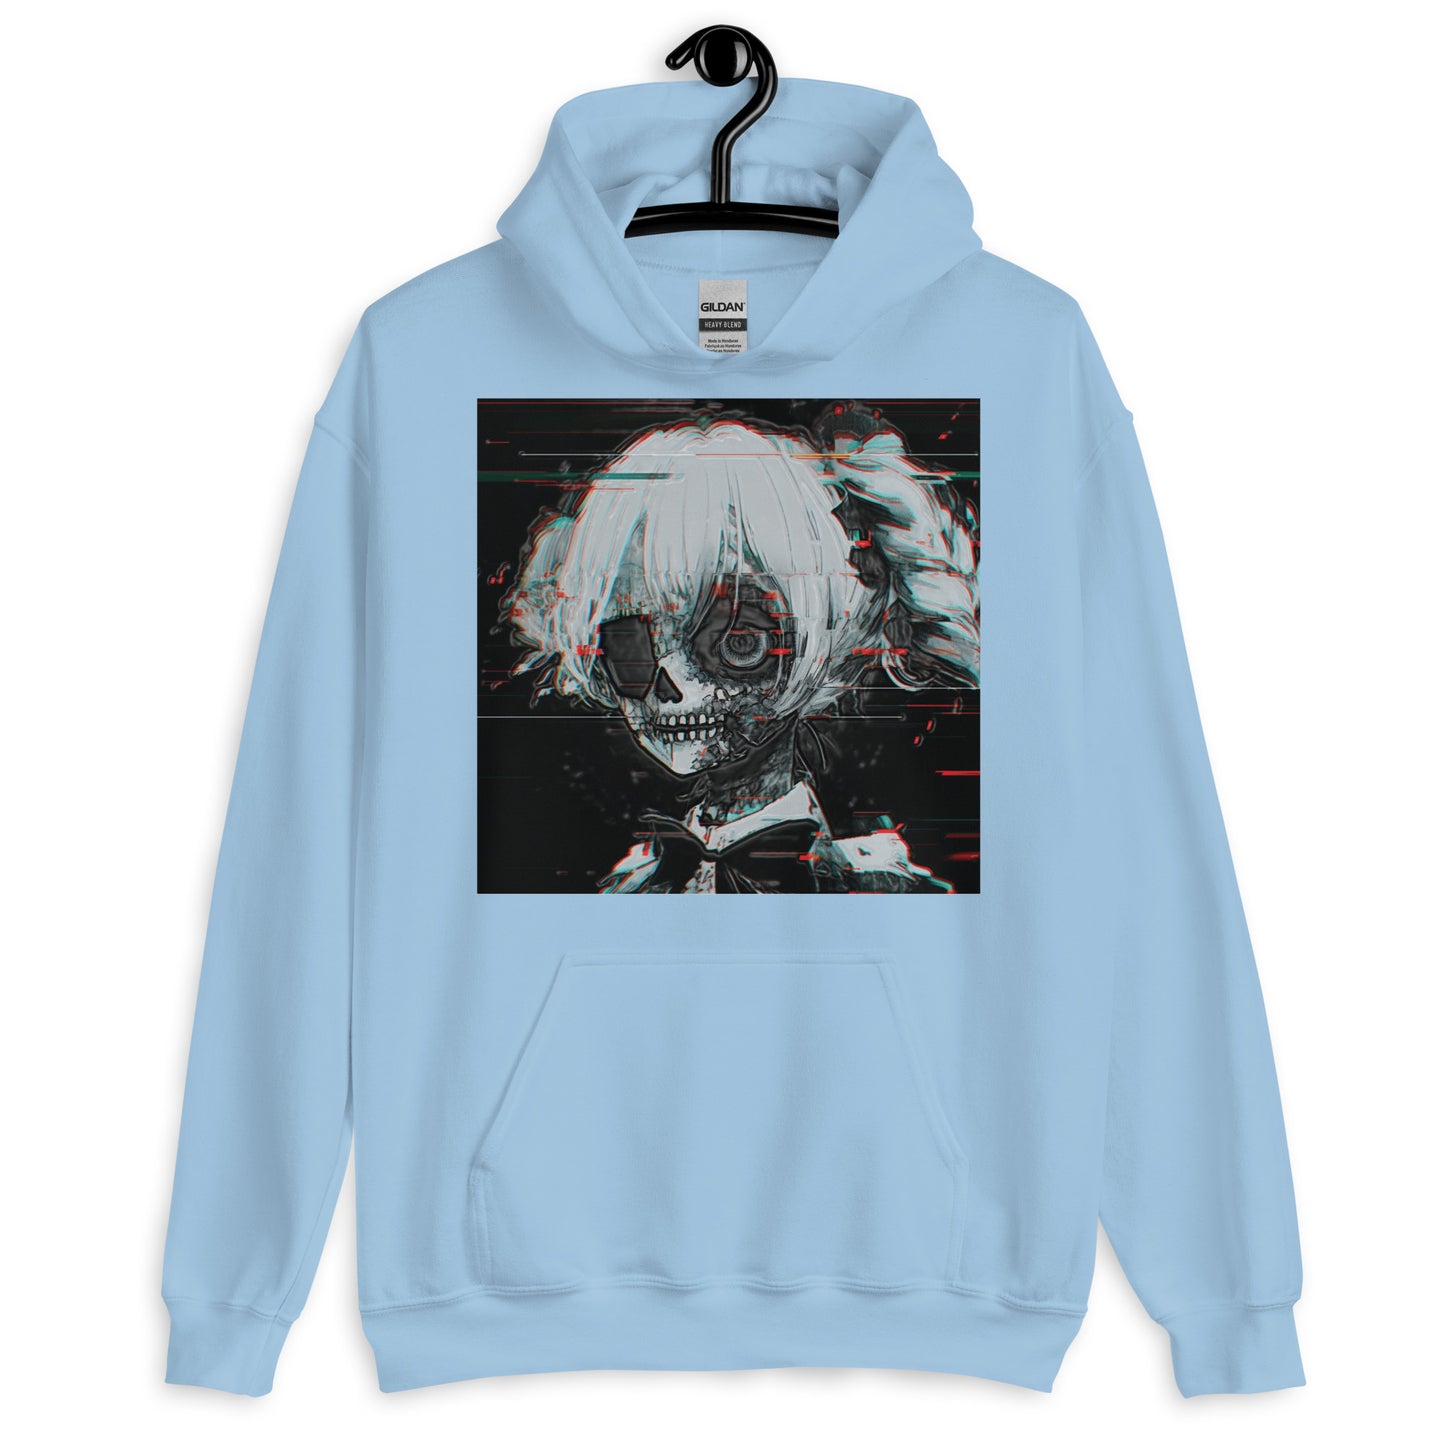 Lily- The Girl Who Cried "Ghost" (Most Wanted)- Hoodie